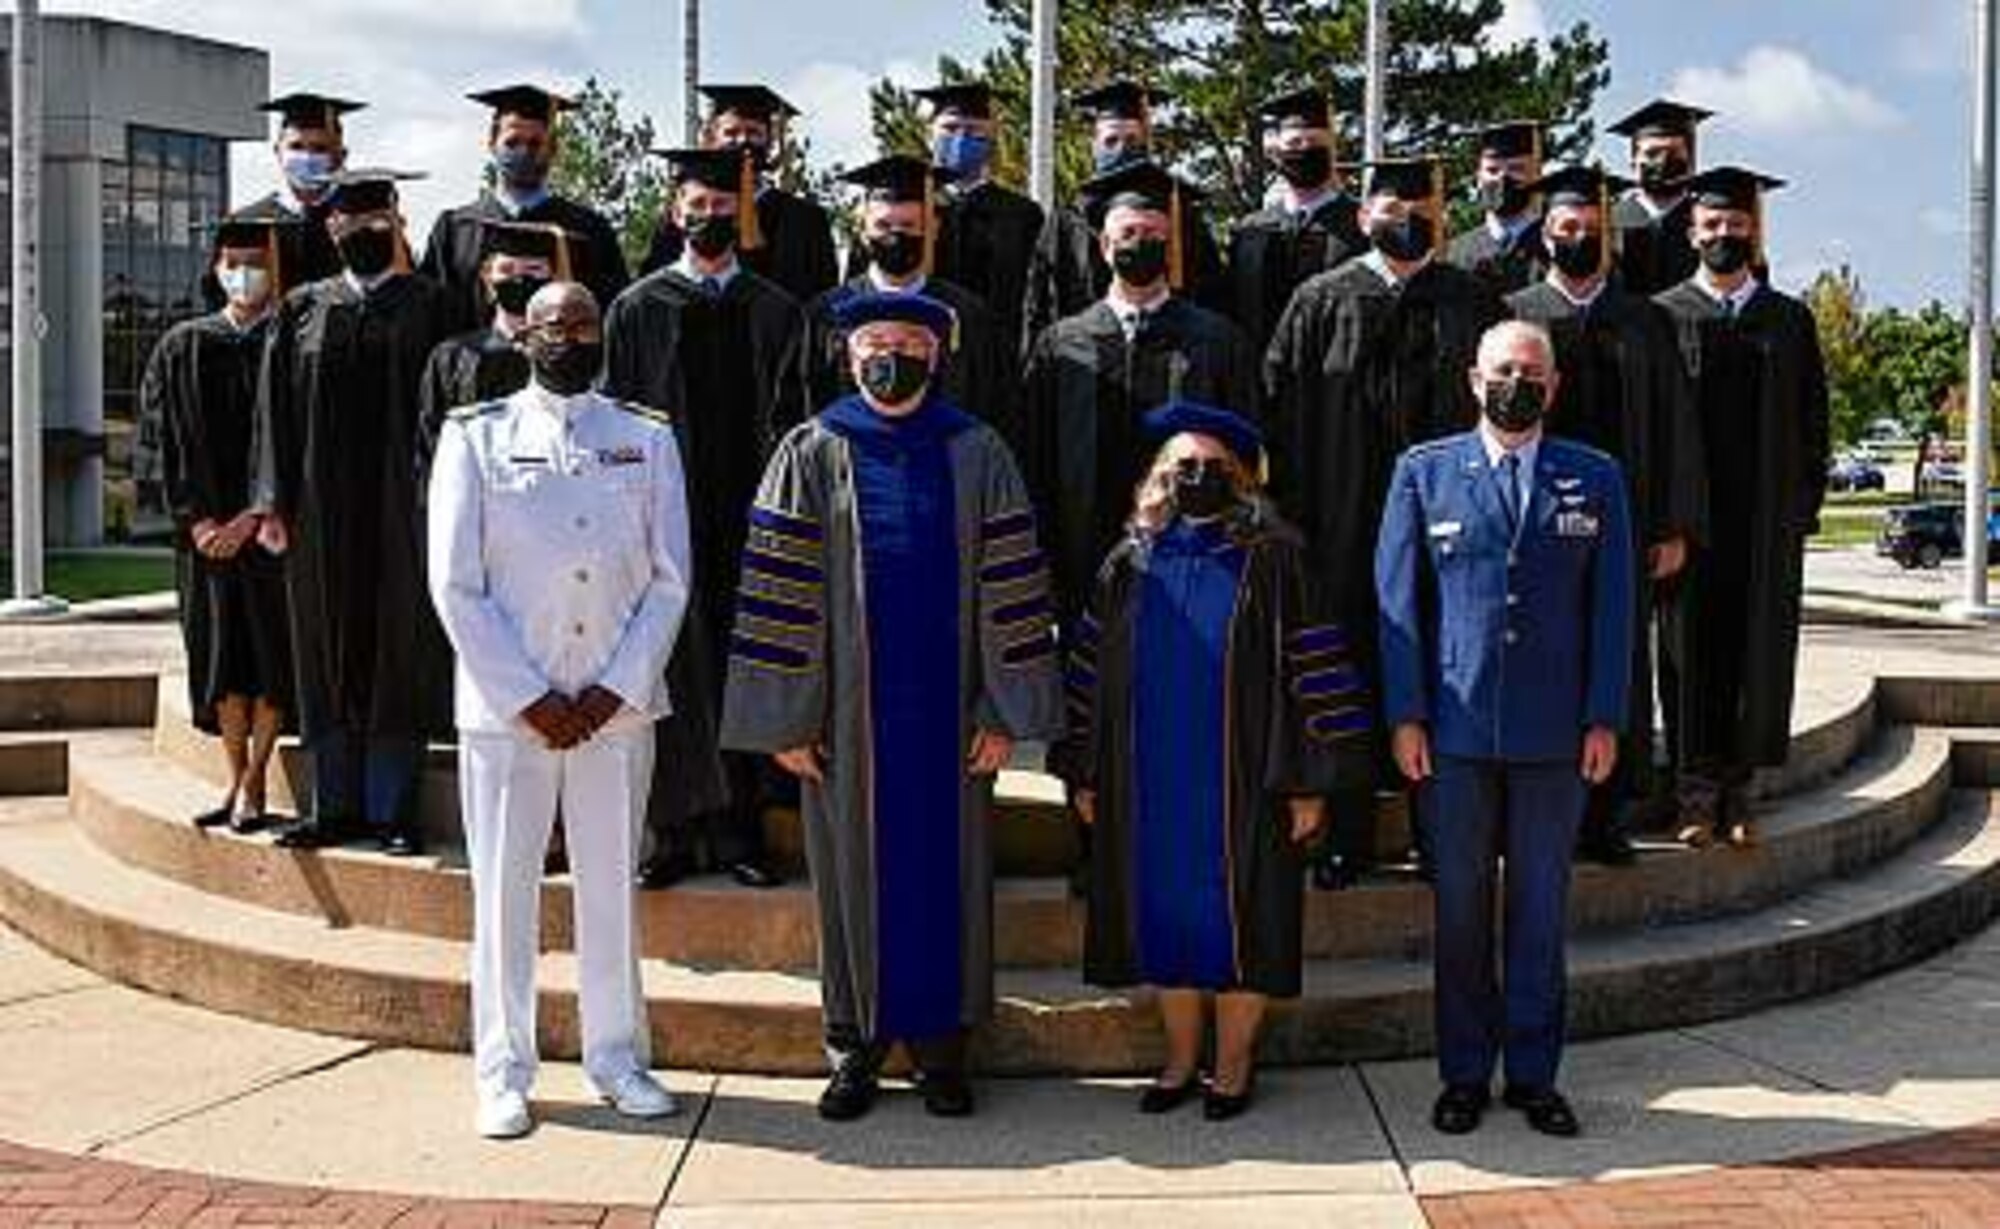 The Air Force Institute of Technology’s Graduate School of Engineering and Management held a ceremony Sept. 16 for 17 students earning doctoral degrees. The newly minted Ph.D.s join a group of more than 960 other AFIT doctorate alumni. (U.S. AIR FORCE PHOTO/2ND LT. ANDREW LOWE)